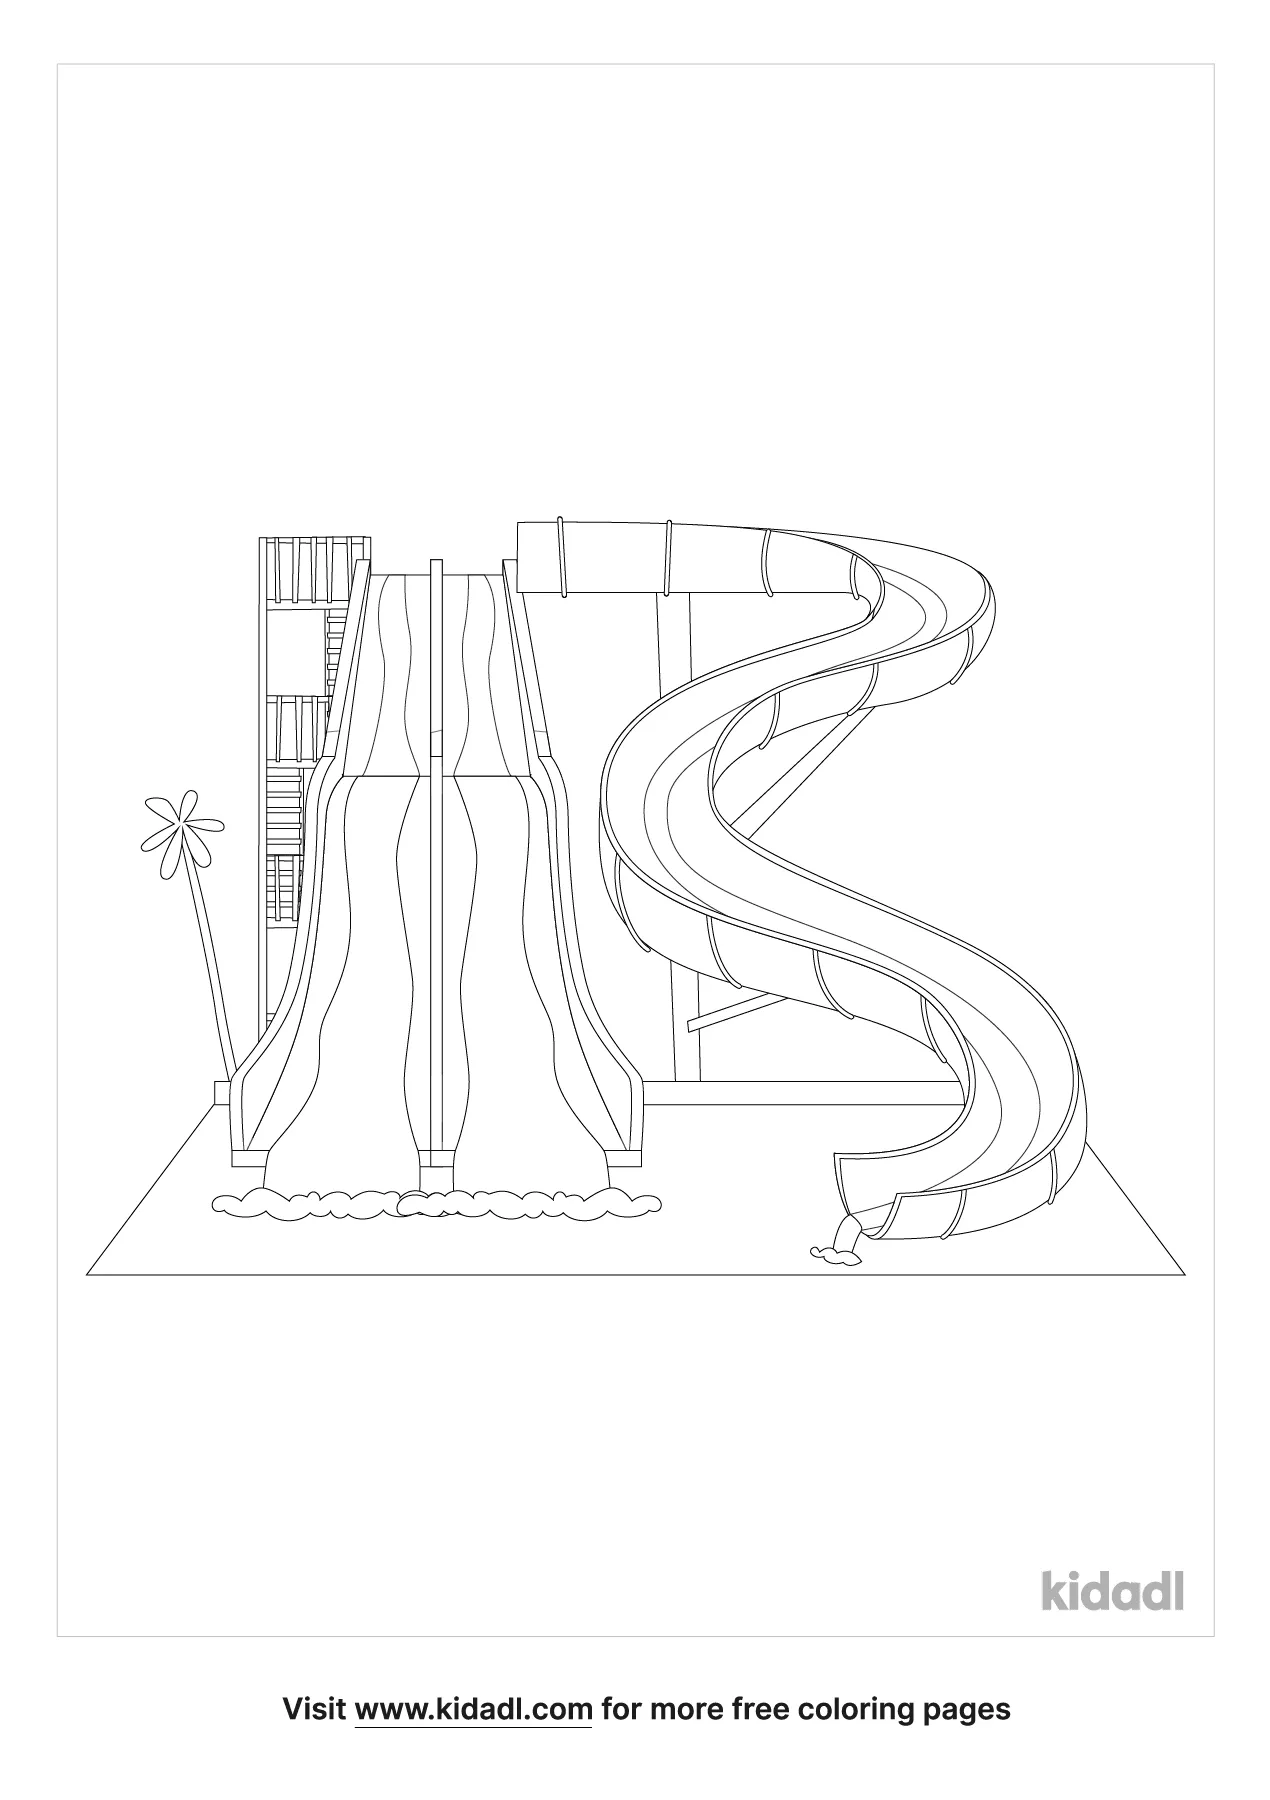 Free water park coloring page coloring page printables